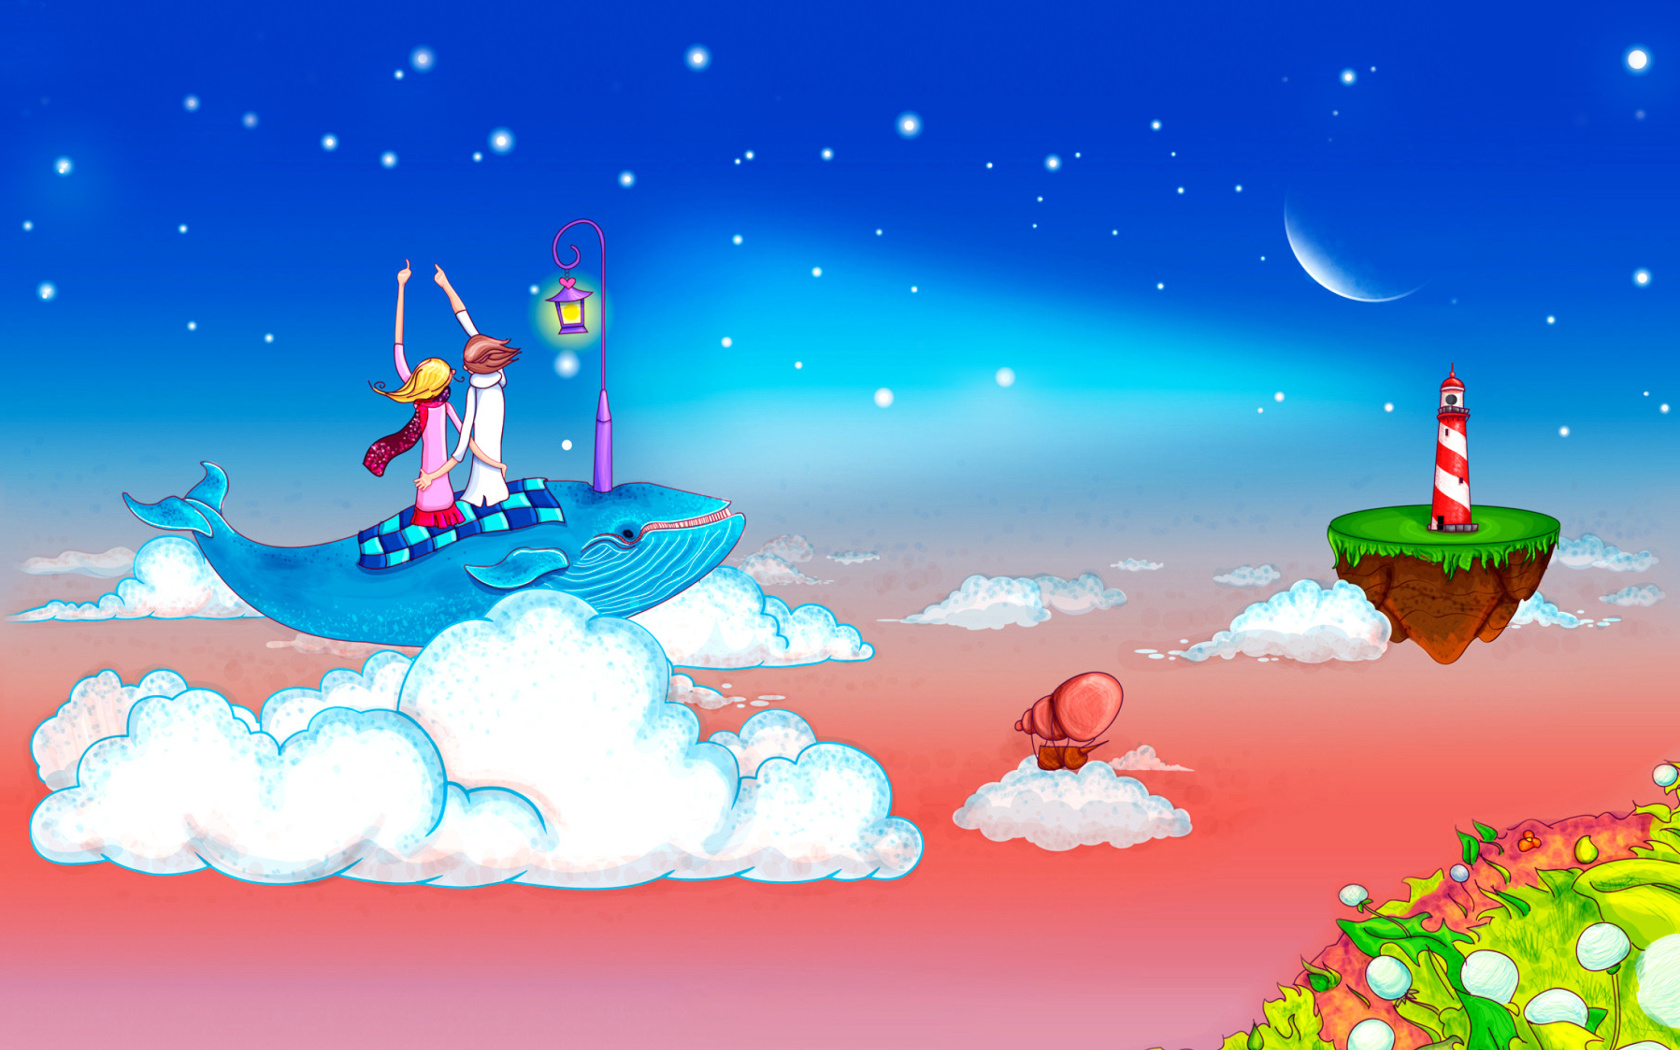 Love on Clouds wallpaper 1680x1050